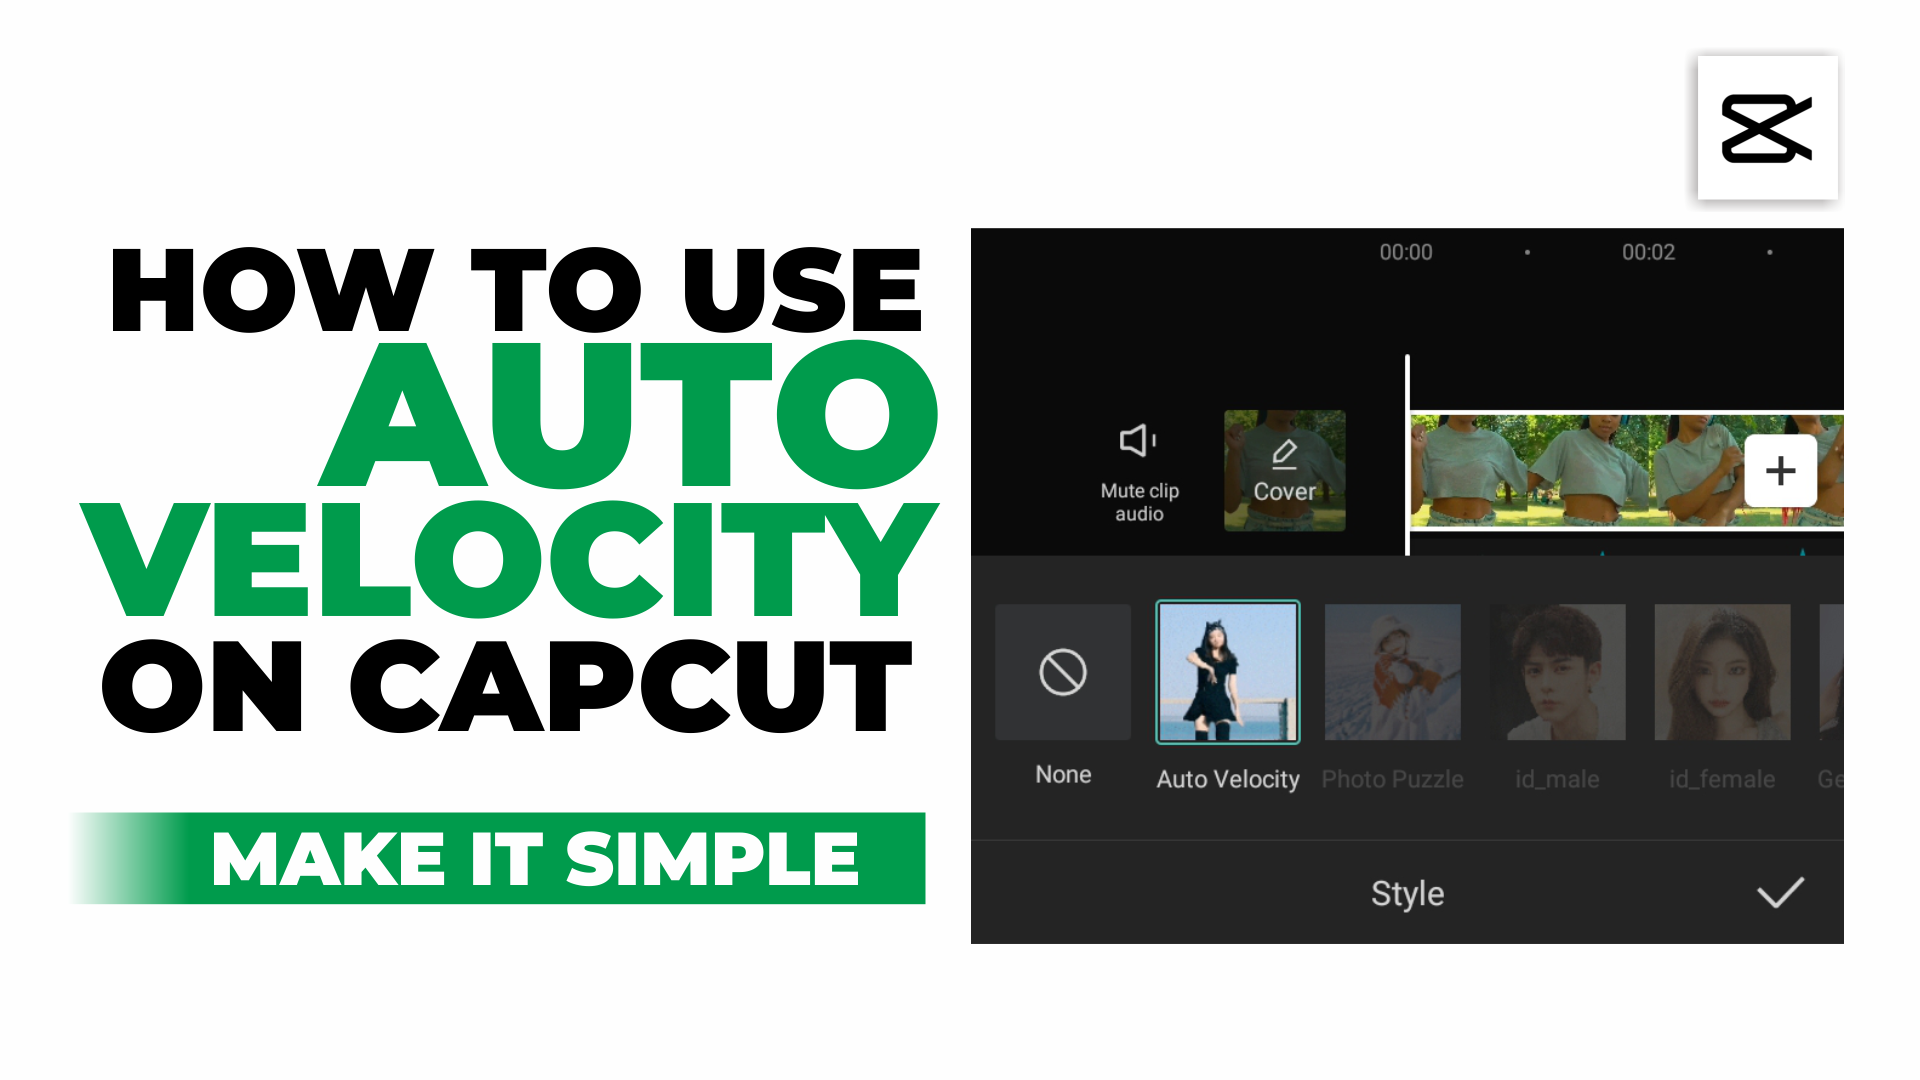 Auto Velocity CapCut How to Get and Use It  Mang Idik